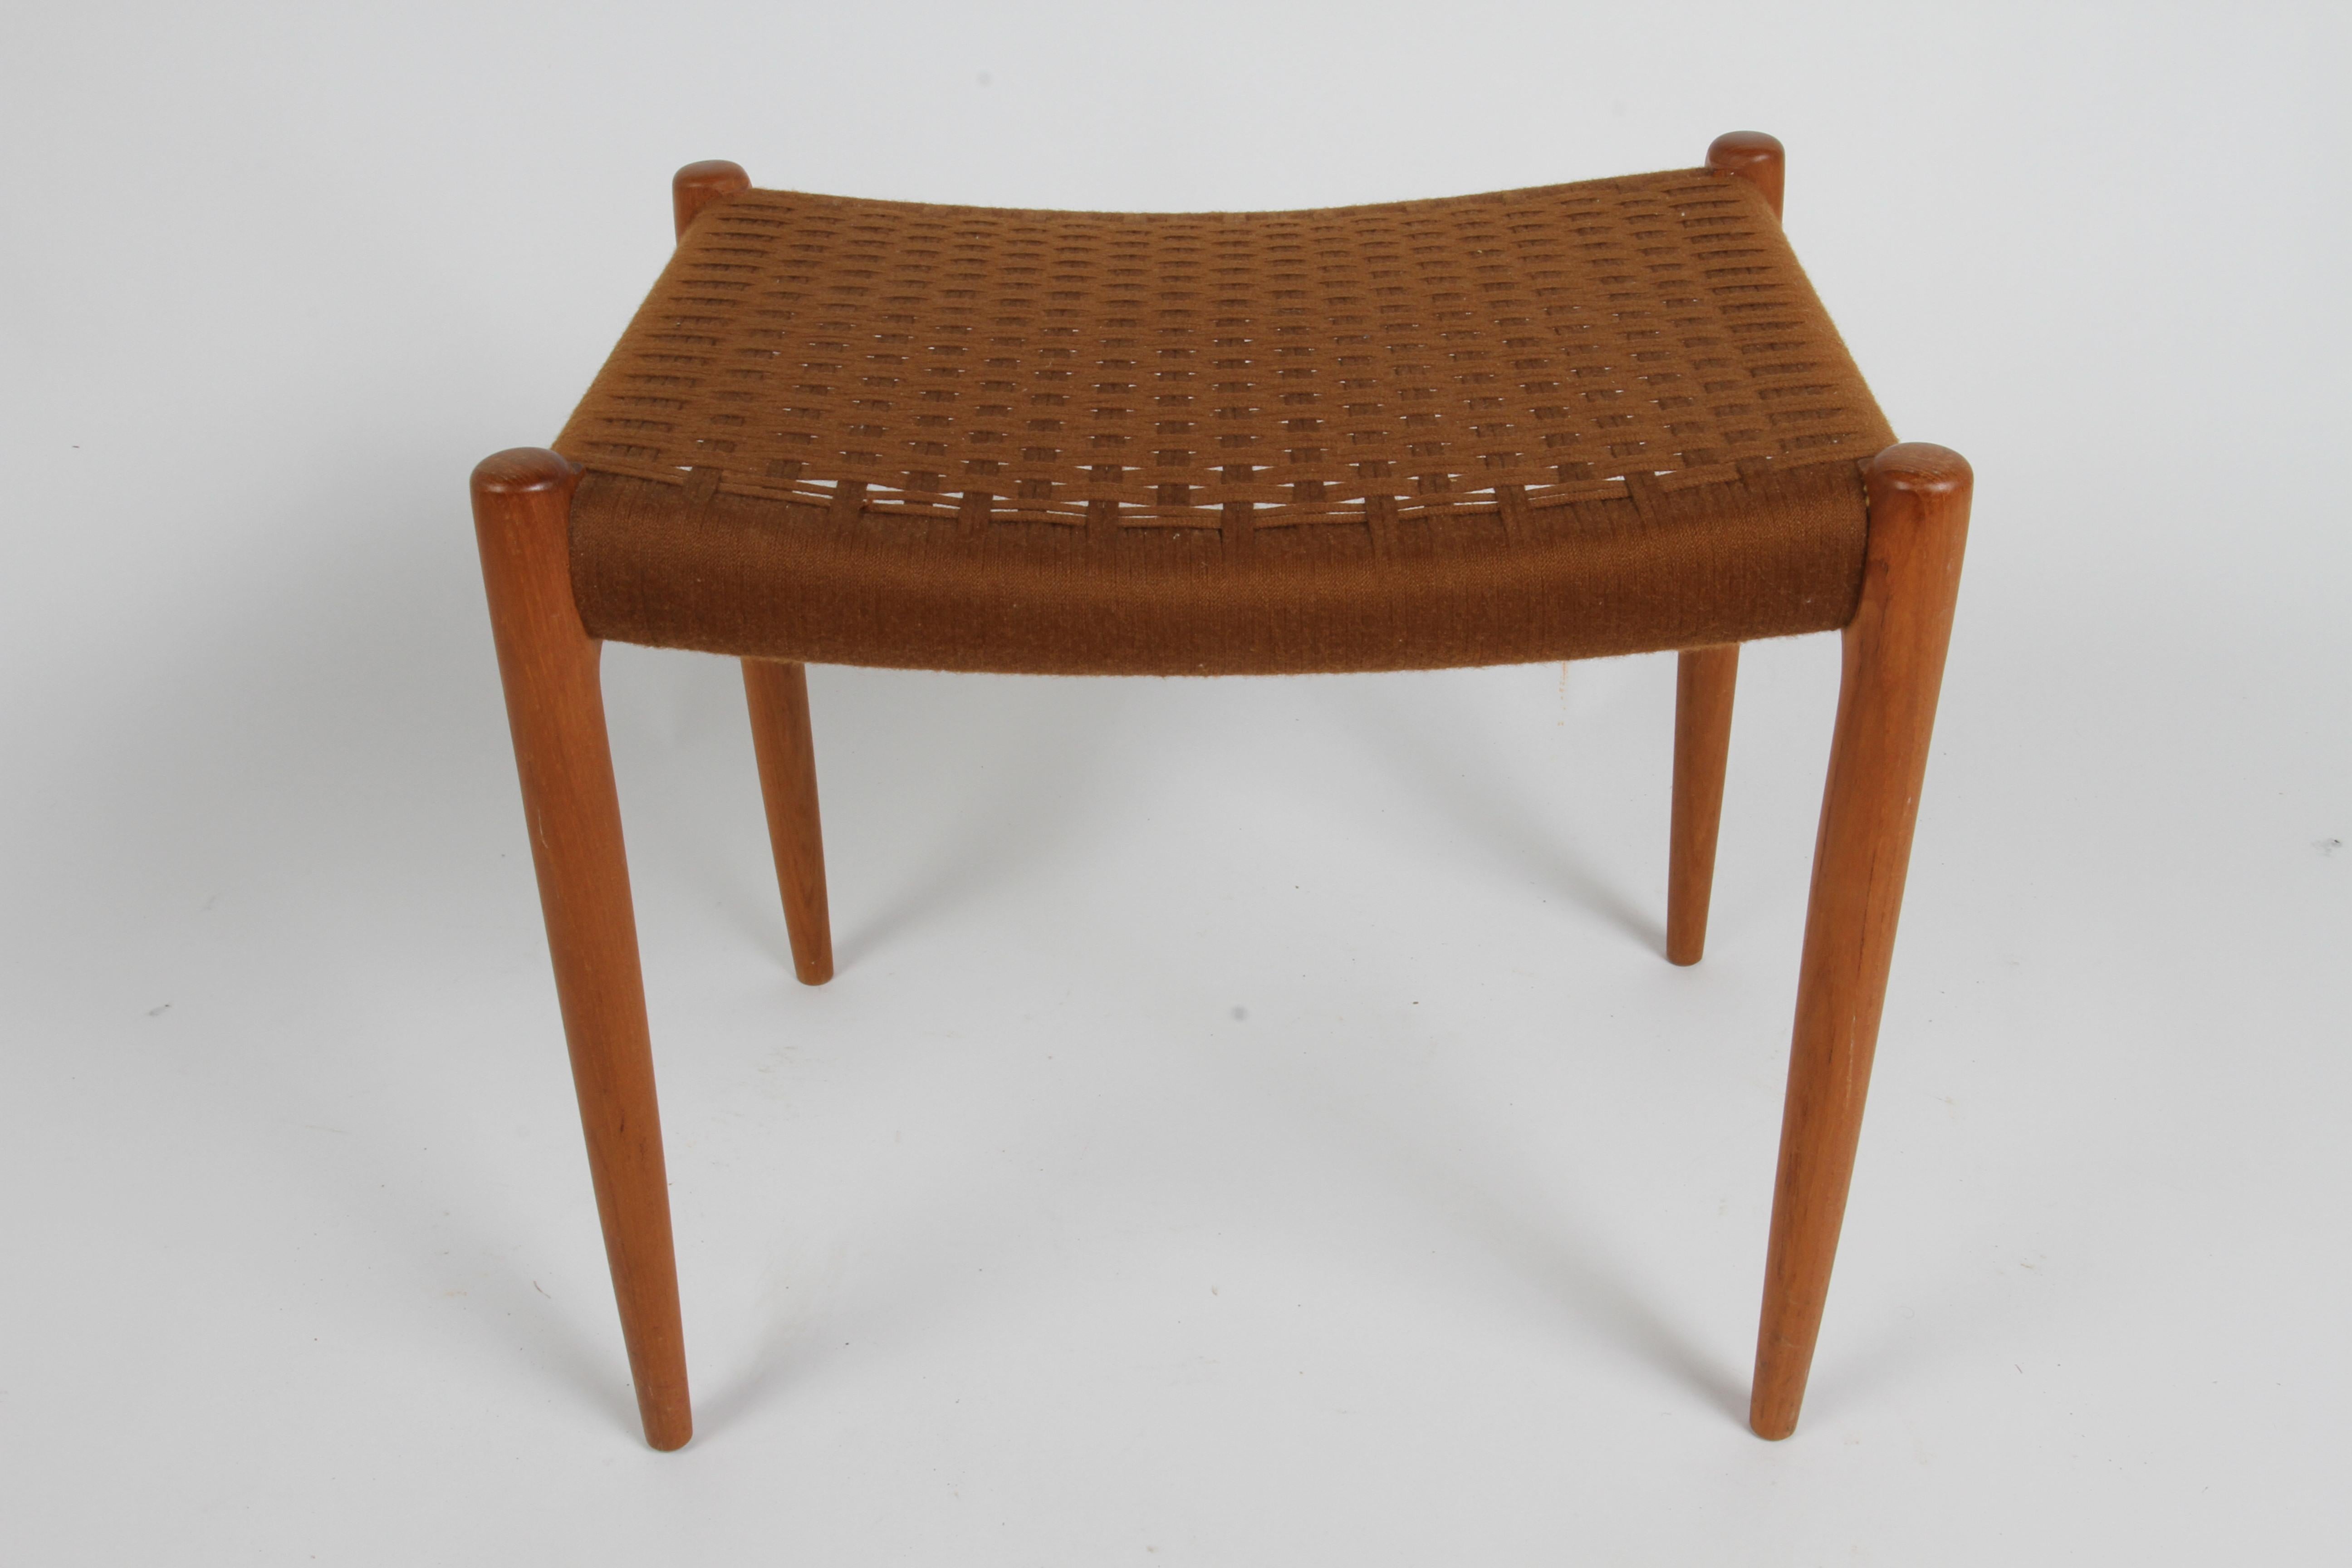 Niels Otto Møller for J.L. Møllers Møbelfabrik in Denmark, model 80A ottoman or bench first designed in 1963
Stamped (J.L. Møller Models made in Denmark) underneath ottoman. Features beautifully sculpted teak frame with woven textile seat. Original